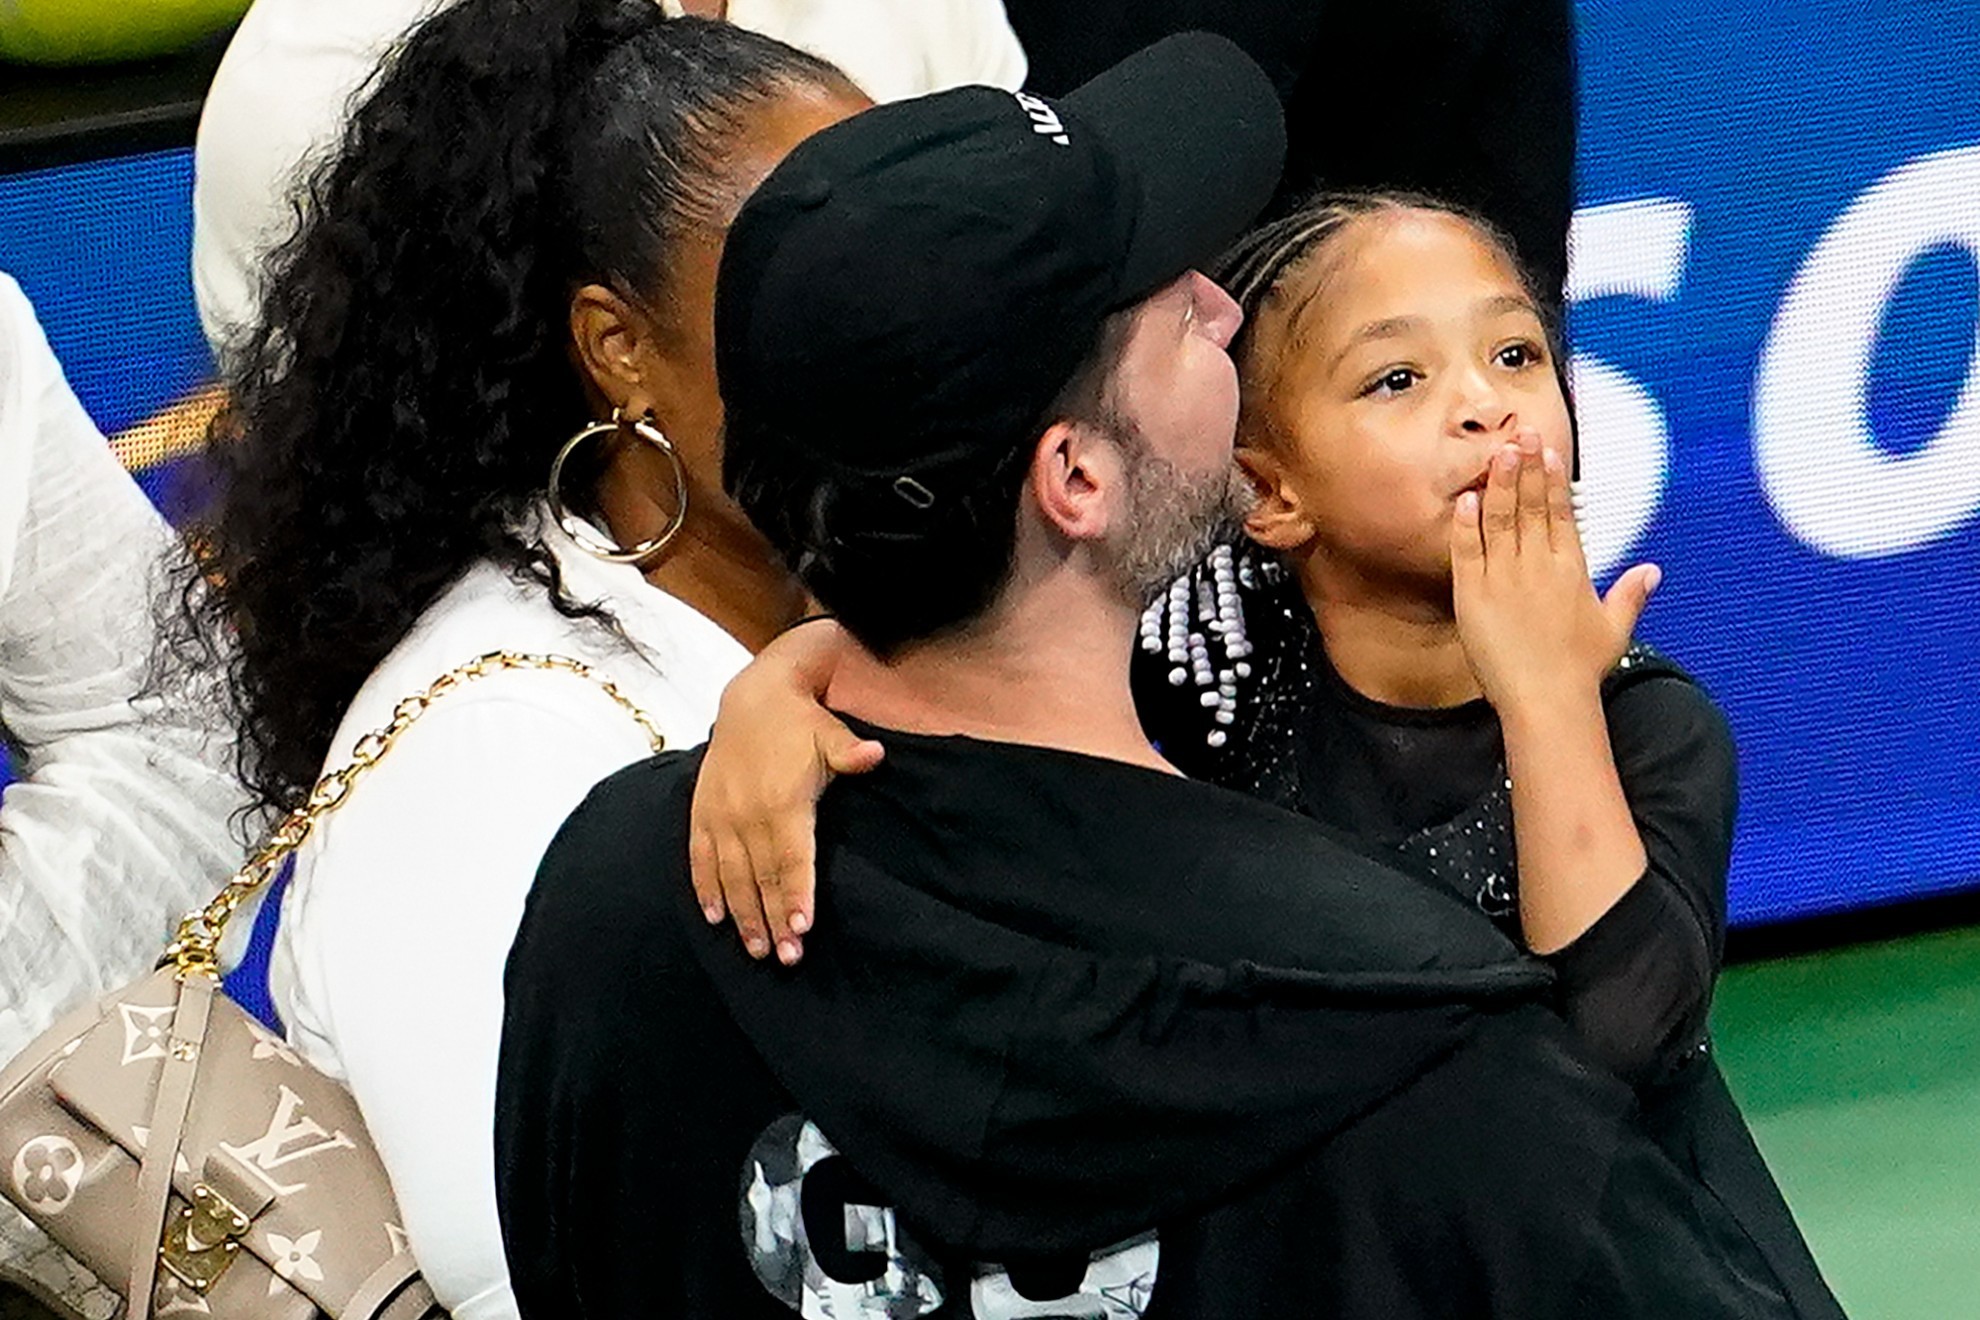 Olympia Ohanian blows a kiss to the crowd while in the arms of her father Alexis Ohanian. / AP